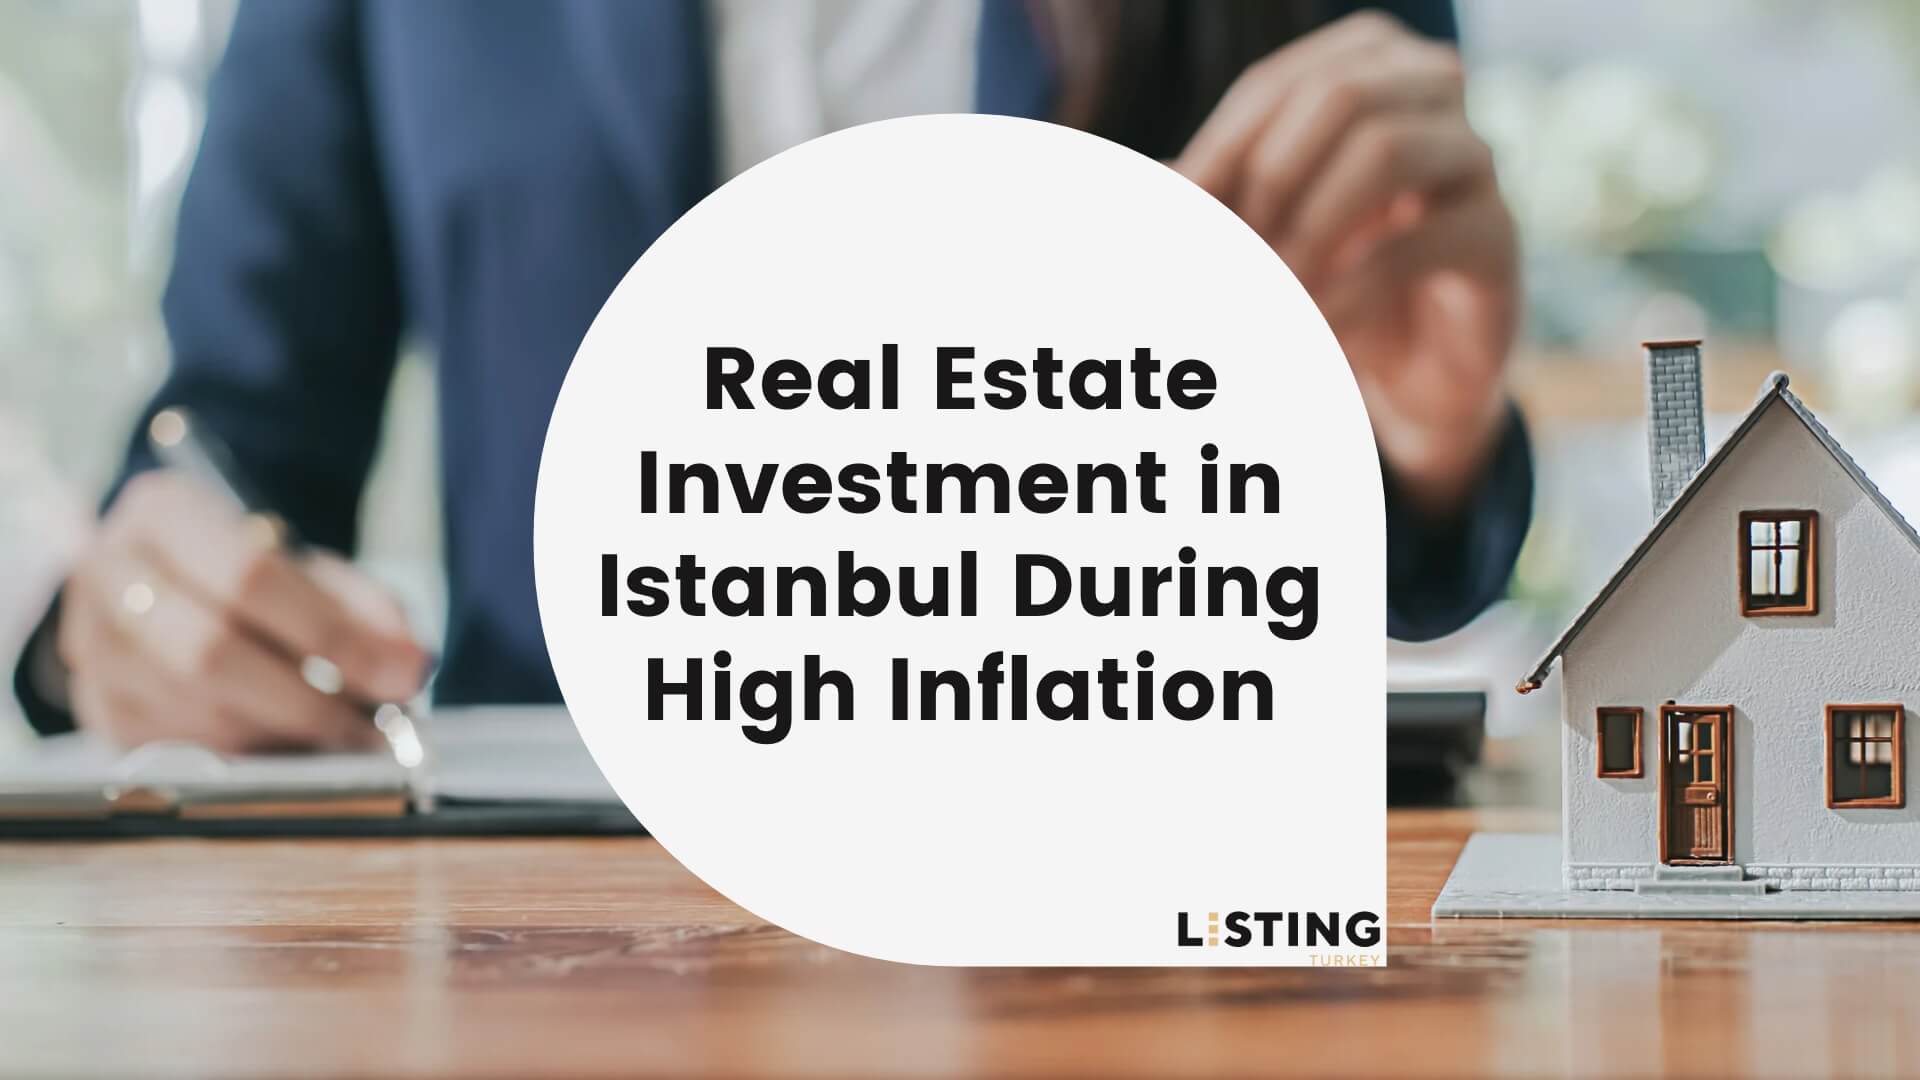 Real Estate Investment in Istanbul During High Inflation